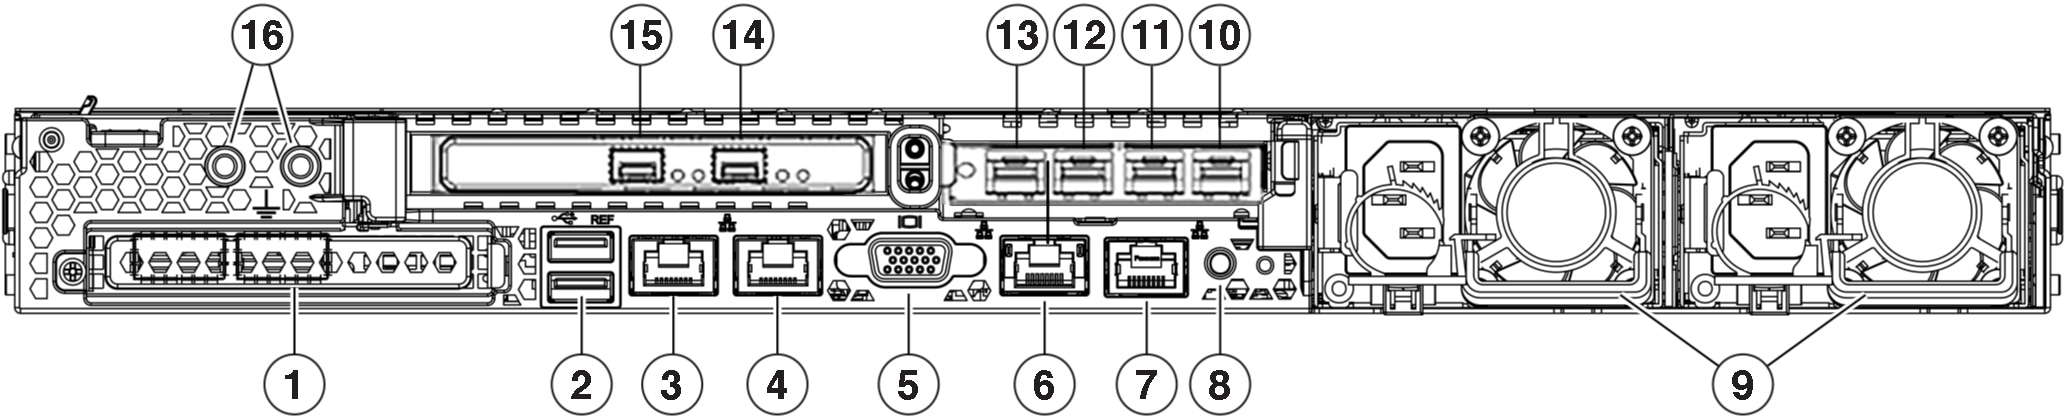 Figure 3: Image of the rear panel of the 44- and 56-core appliance